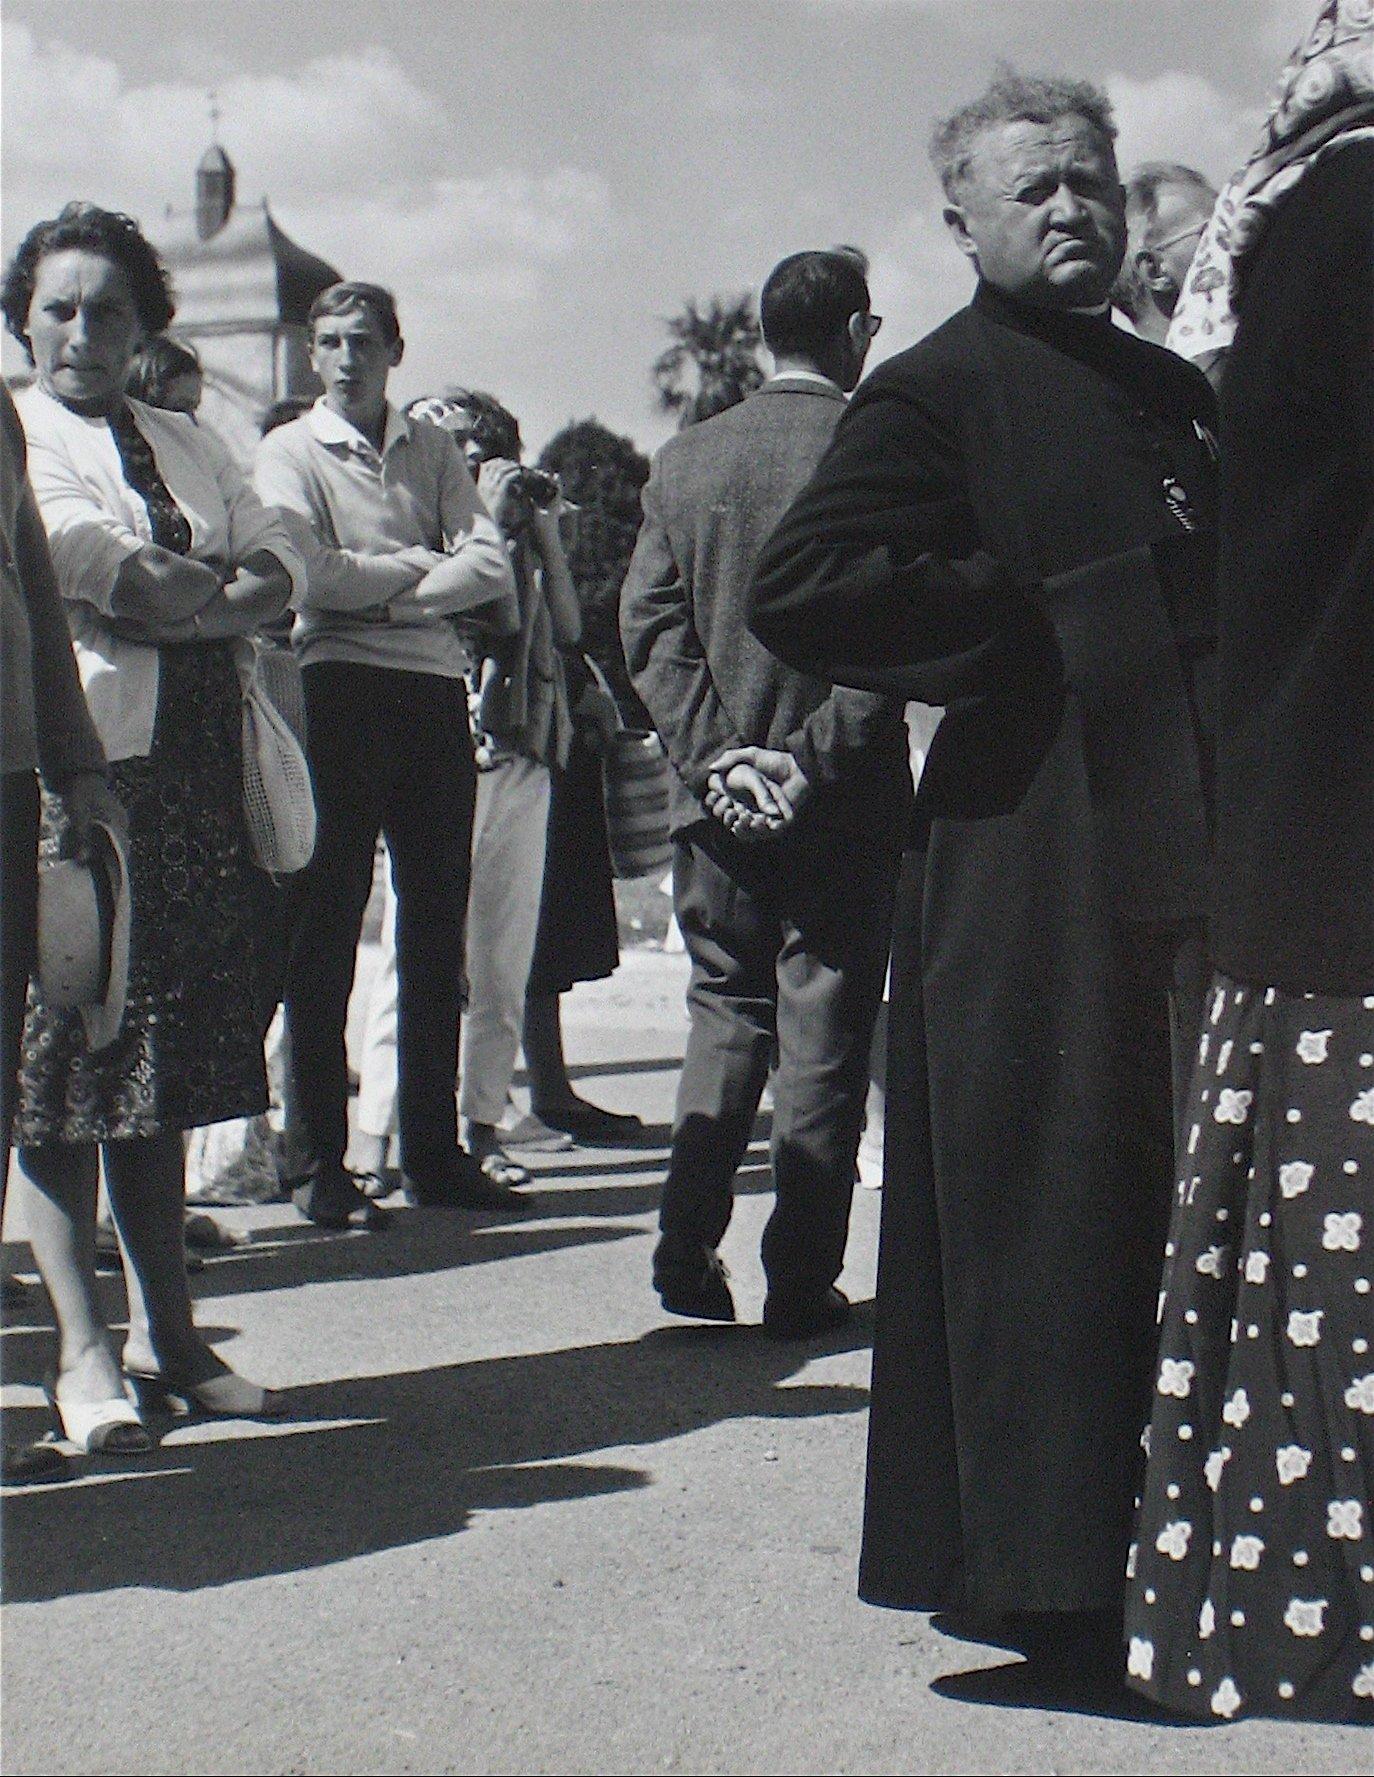 People in Que City Scene 1960s Black and White Photograph